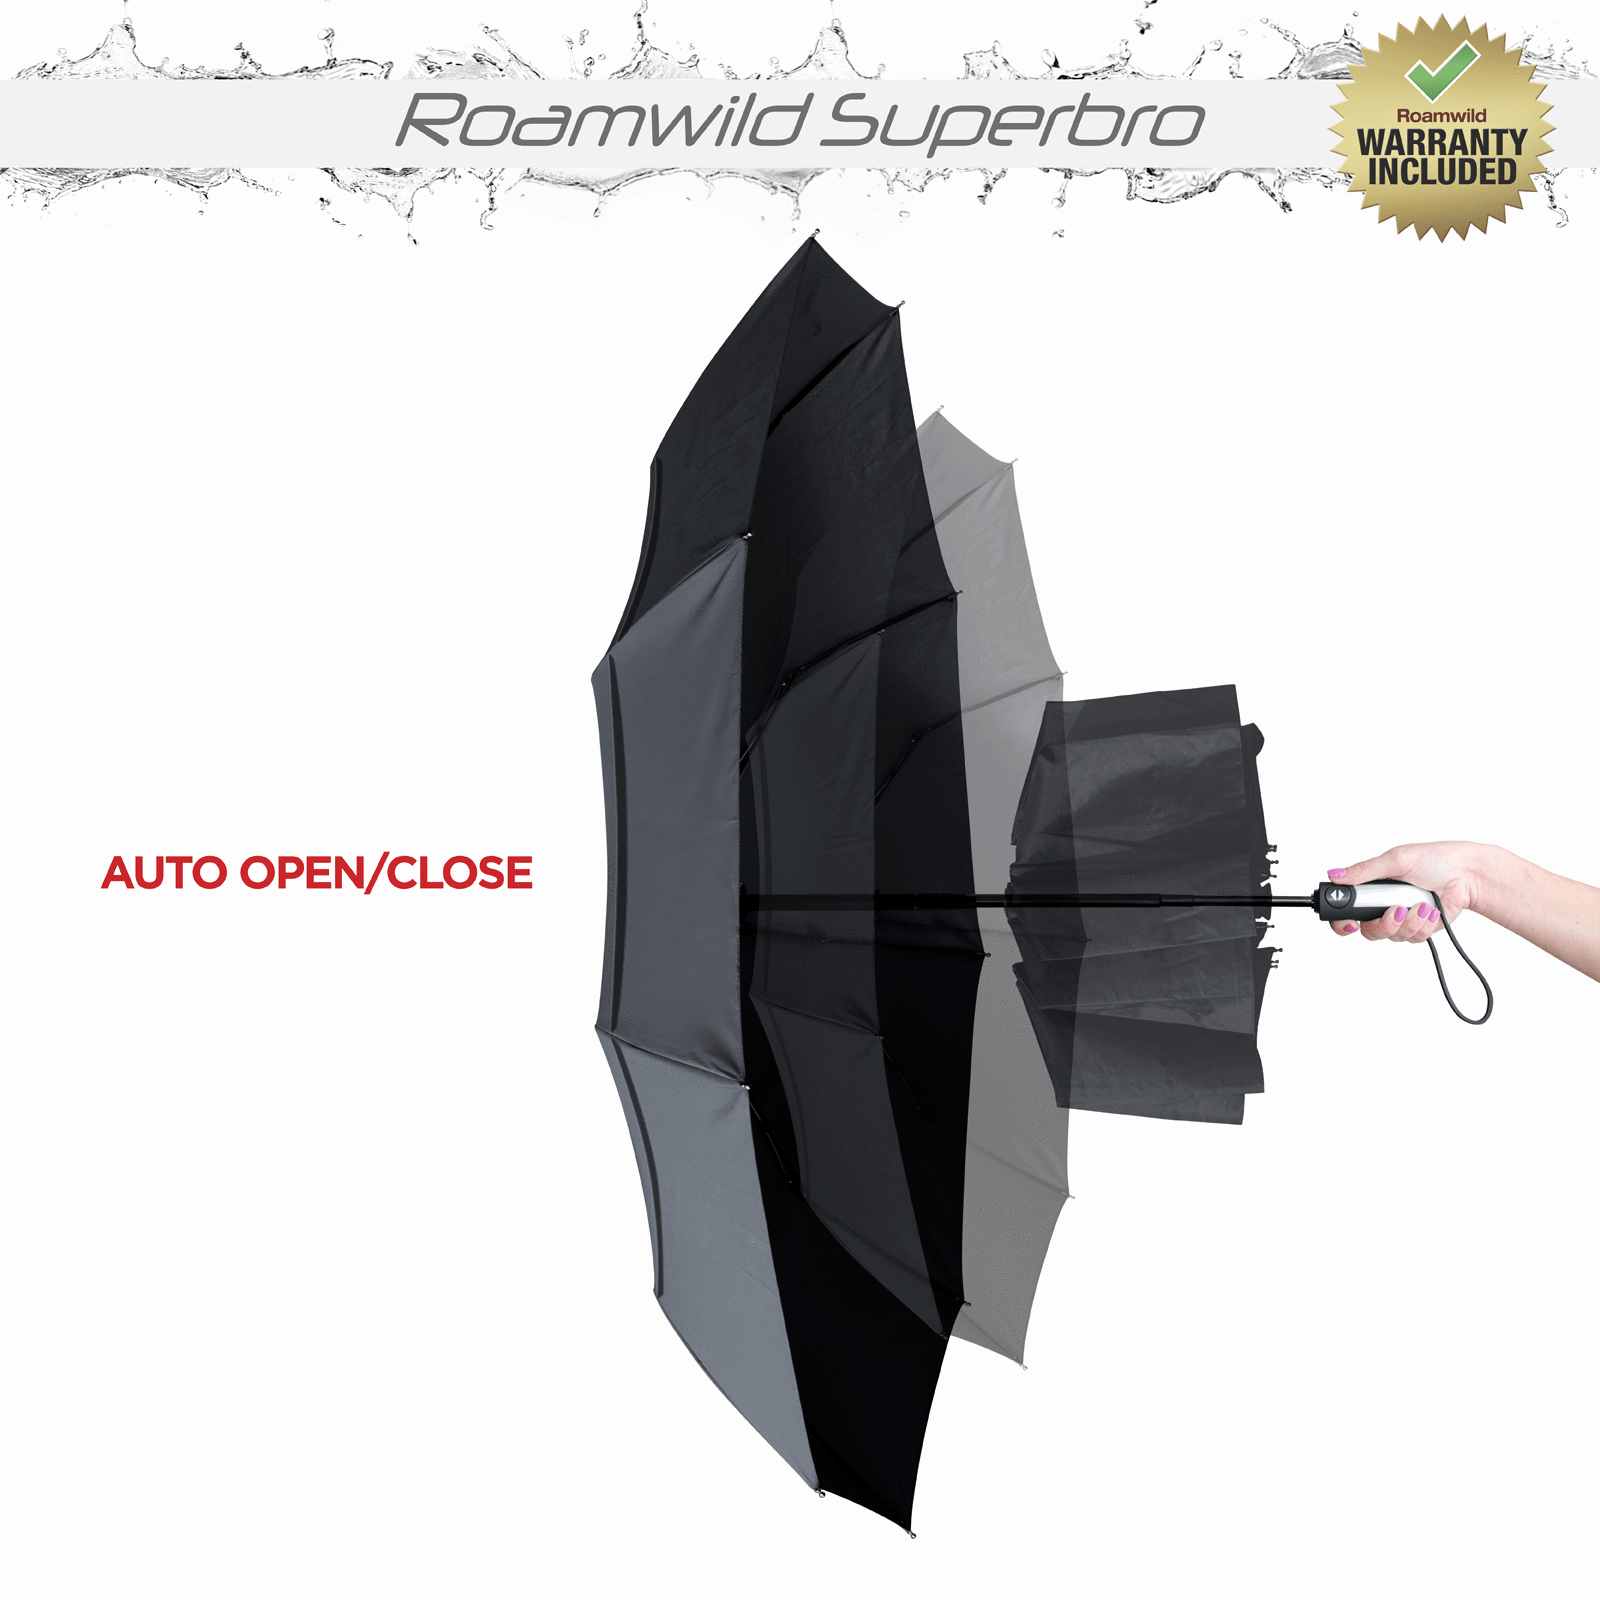 Roamwild Vented SuperBRO Super Strong Black Fast Drying Automatic Compact Umbrella